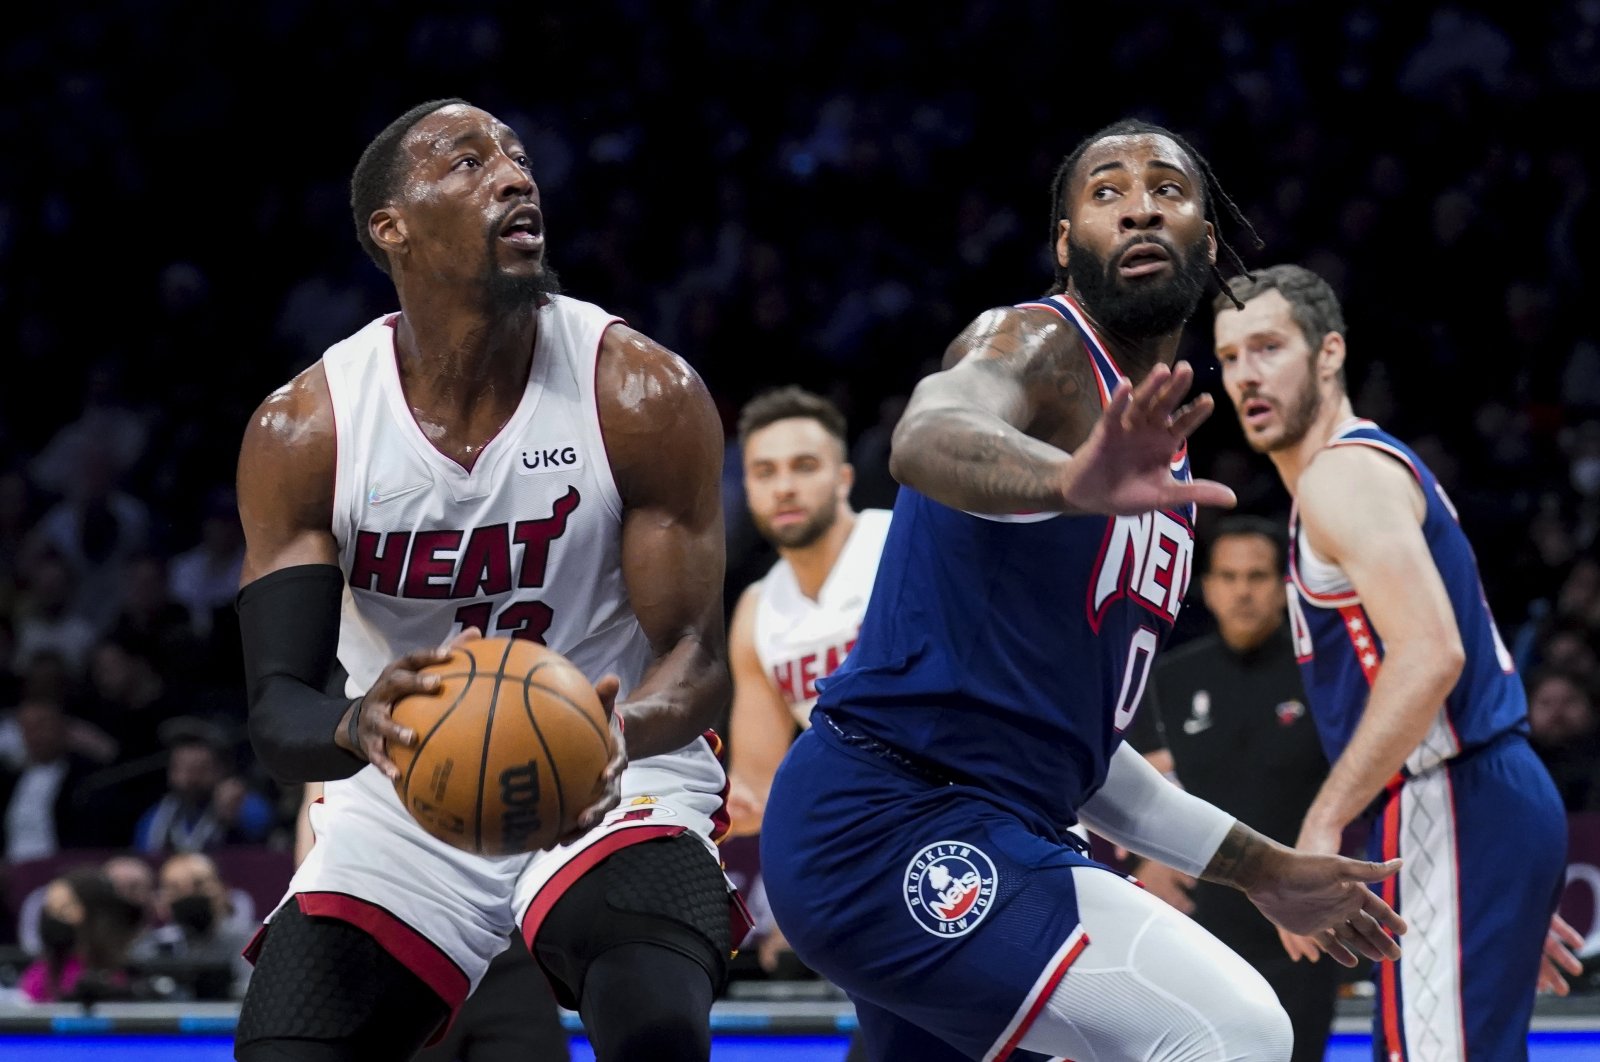 Miami Heat&#039;s Bam Adebayo (L) drives around Brooklyn Nets&#039; Andre Drummond during an NBA game, New York, U.S., March 3, 2022. (AP Photo)